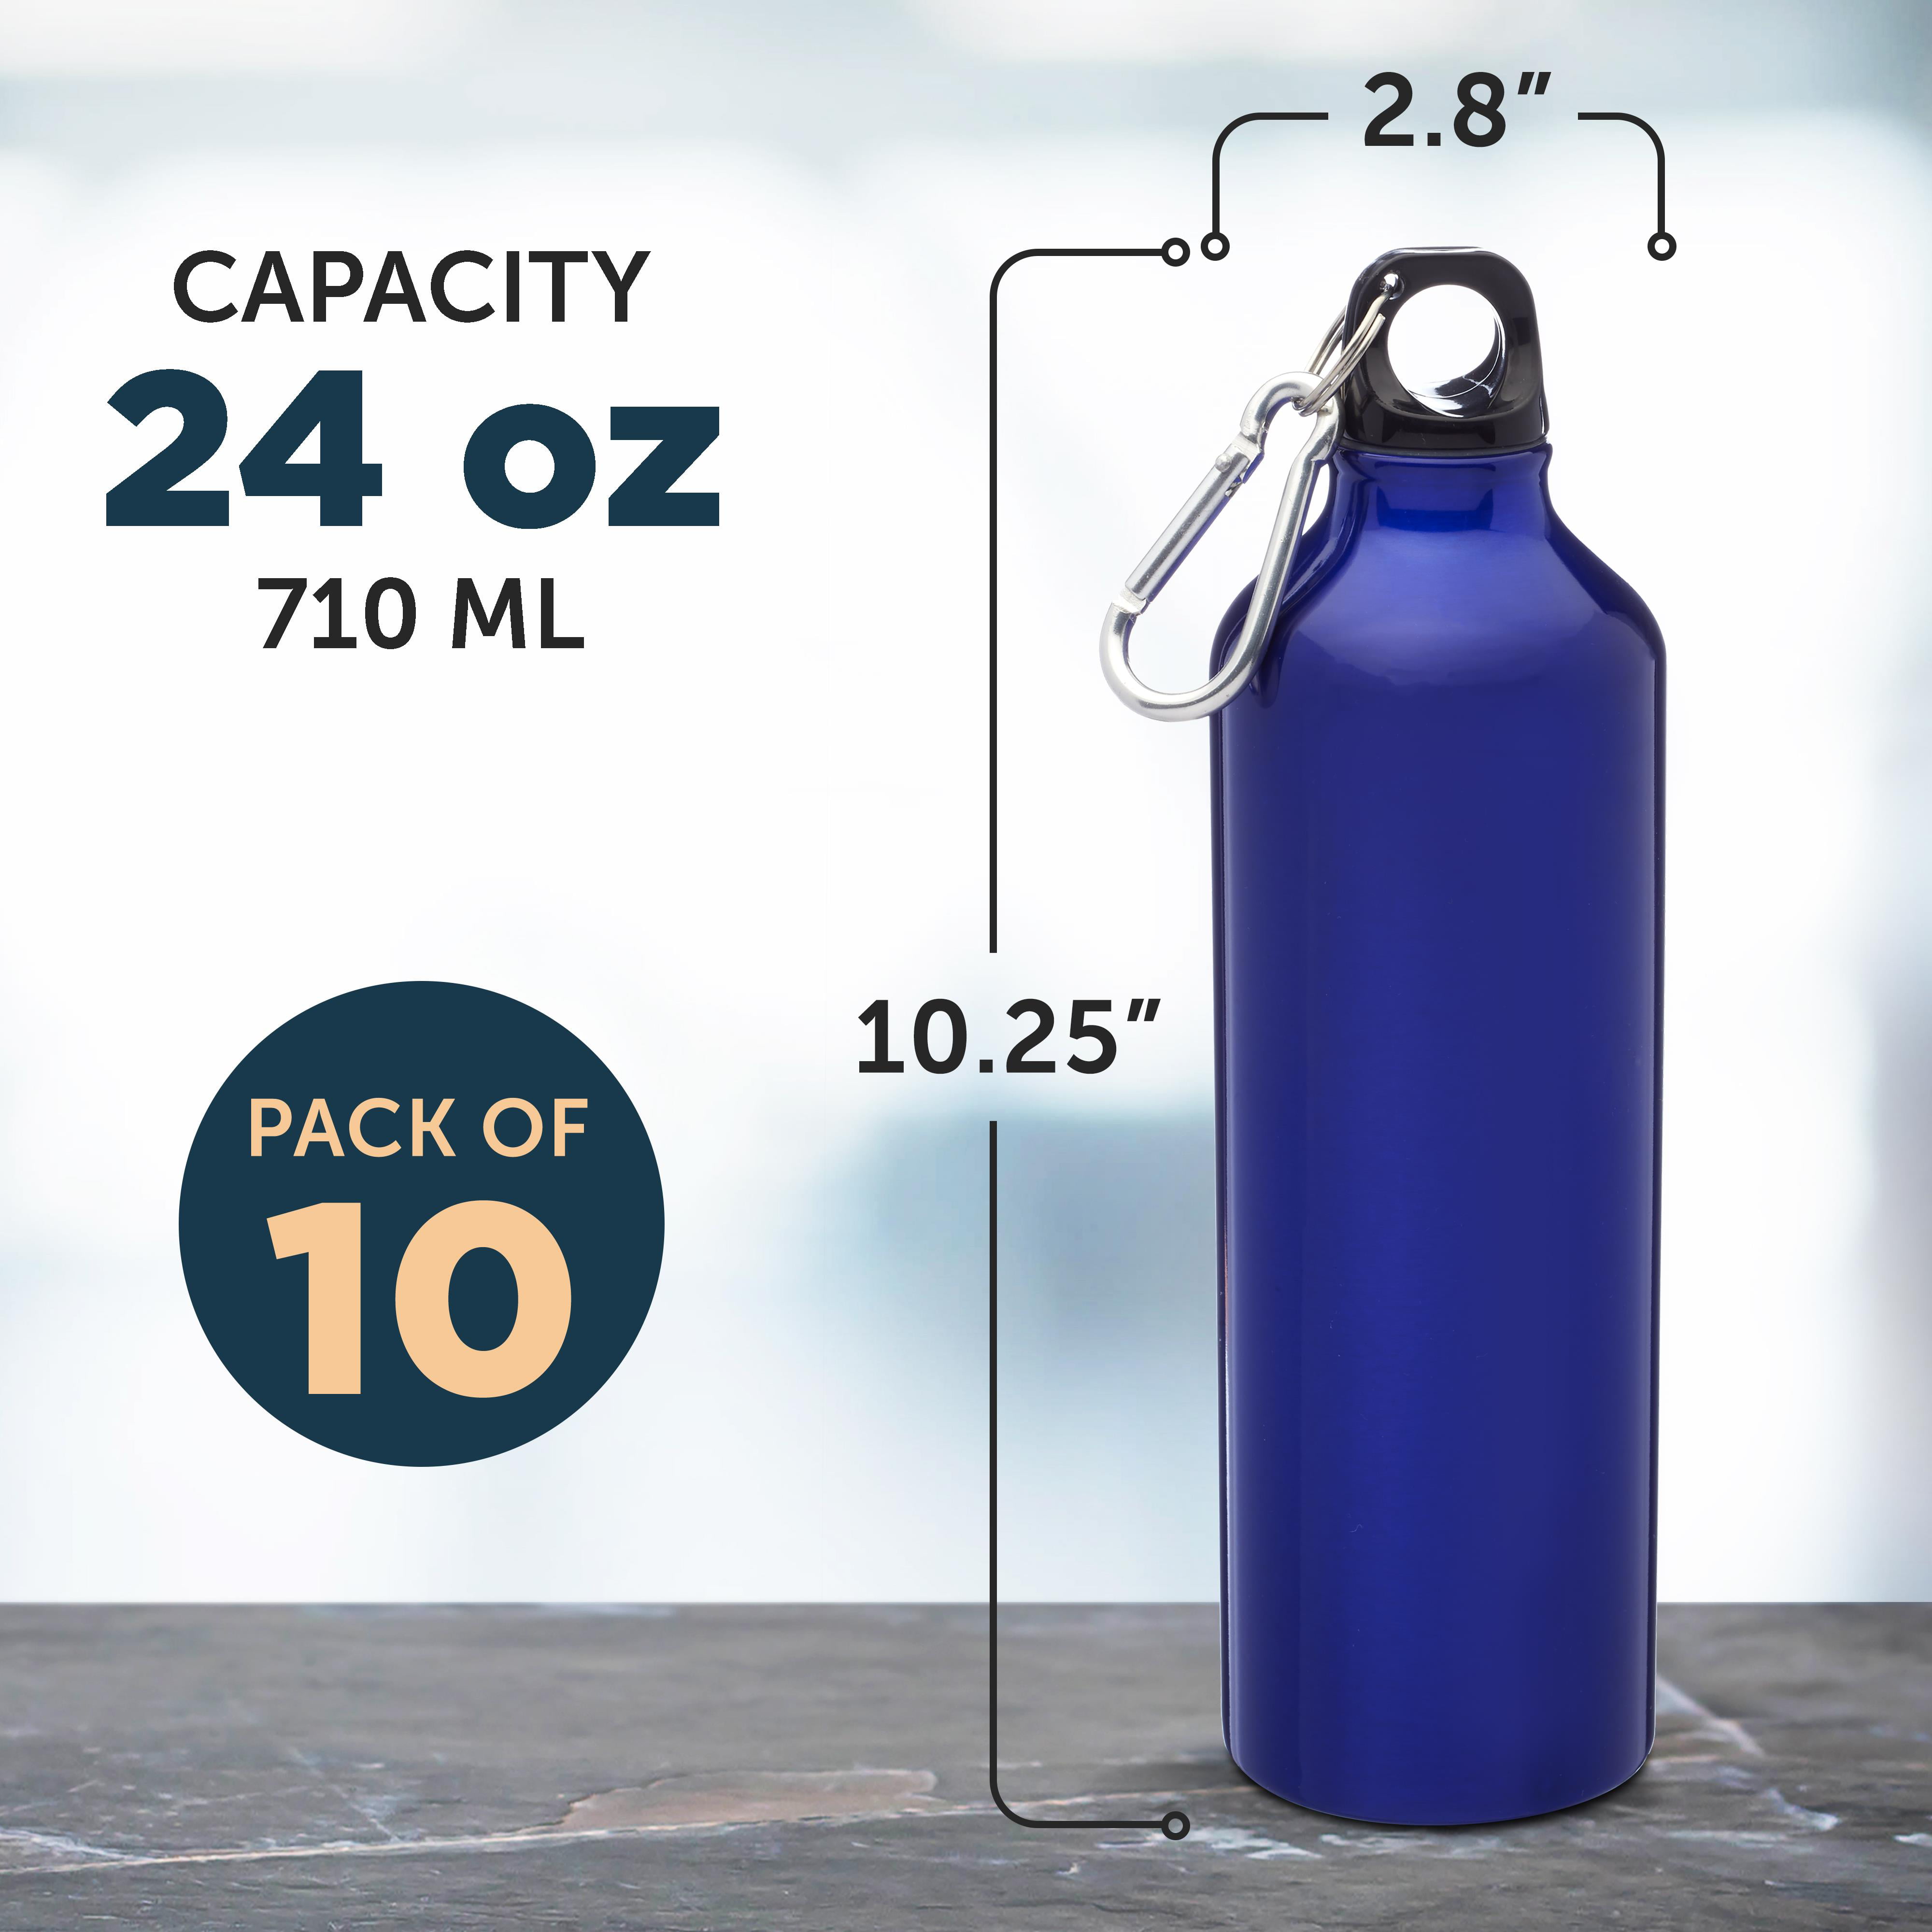 Aluminum Water Bottle with Carabiner-Promo Water Bottle - PROMOrx